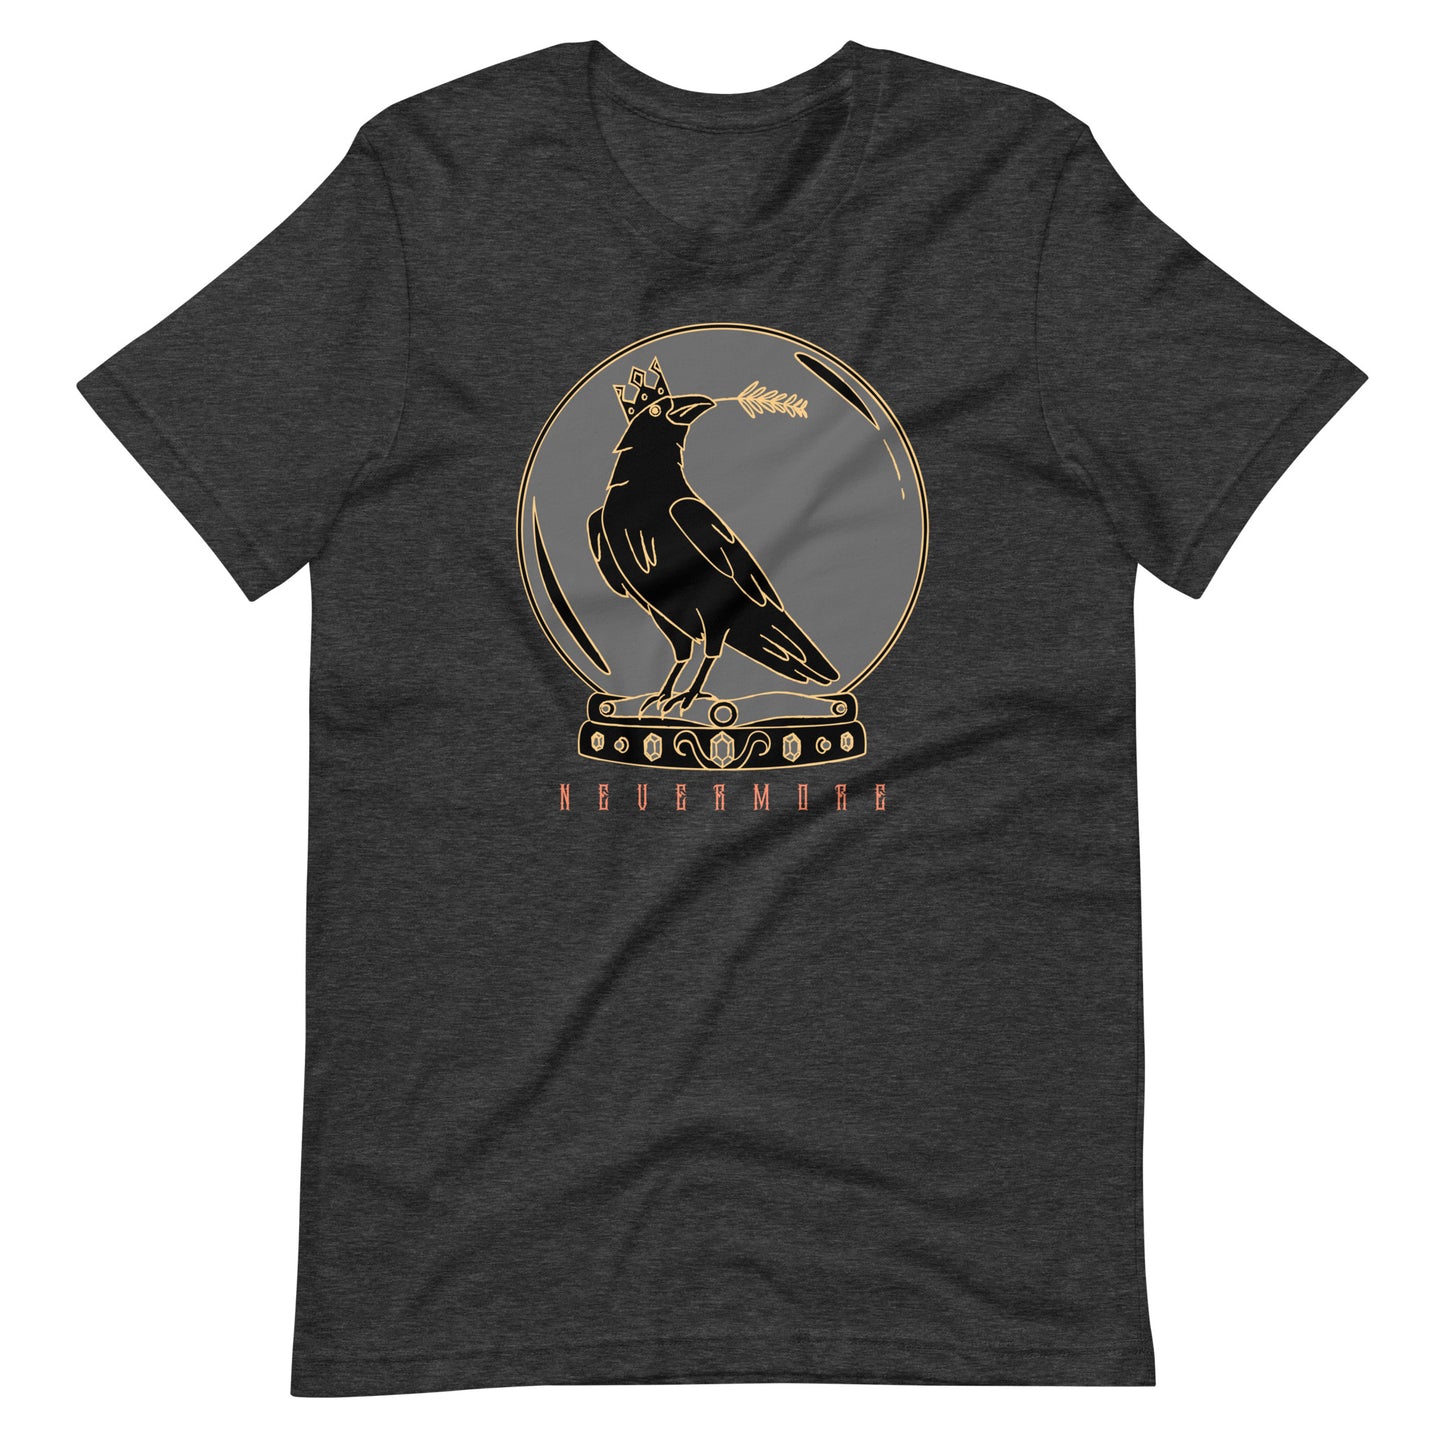 Nevermore Goth T-Shirt by Edgar Allan Poe: Comfort and Style in Every Thread